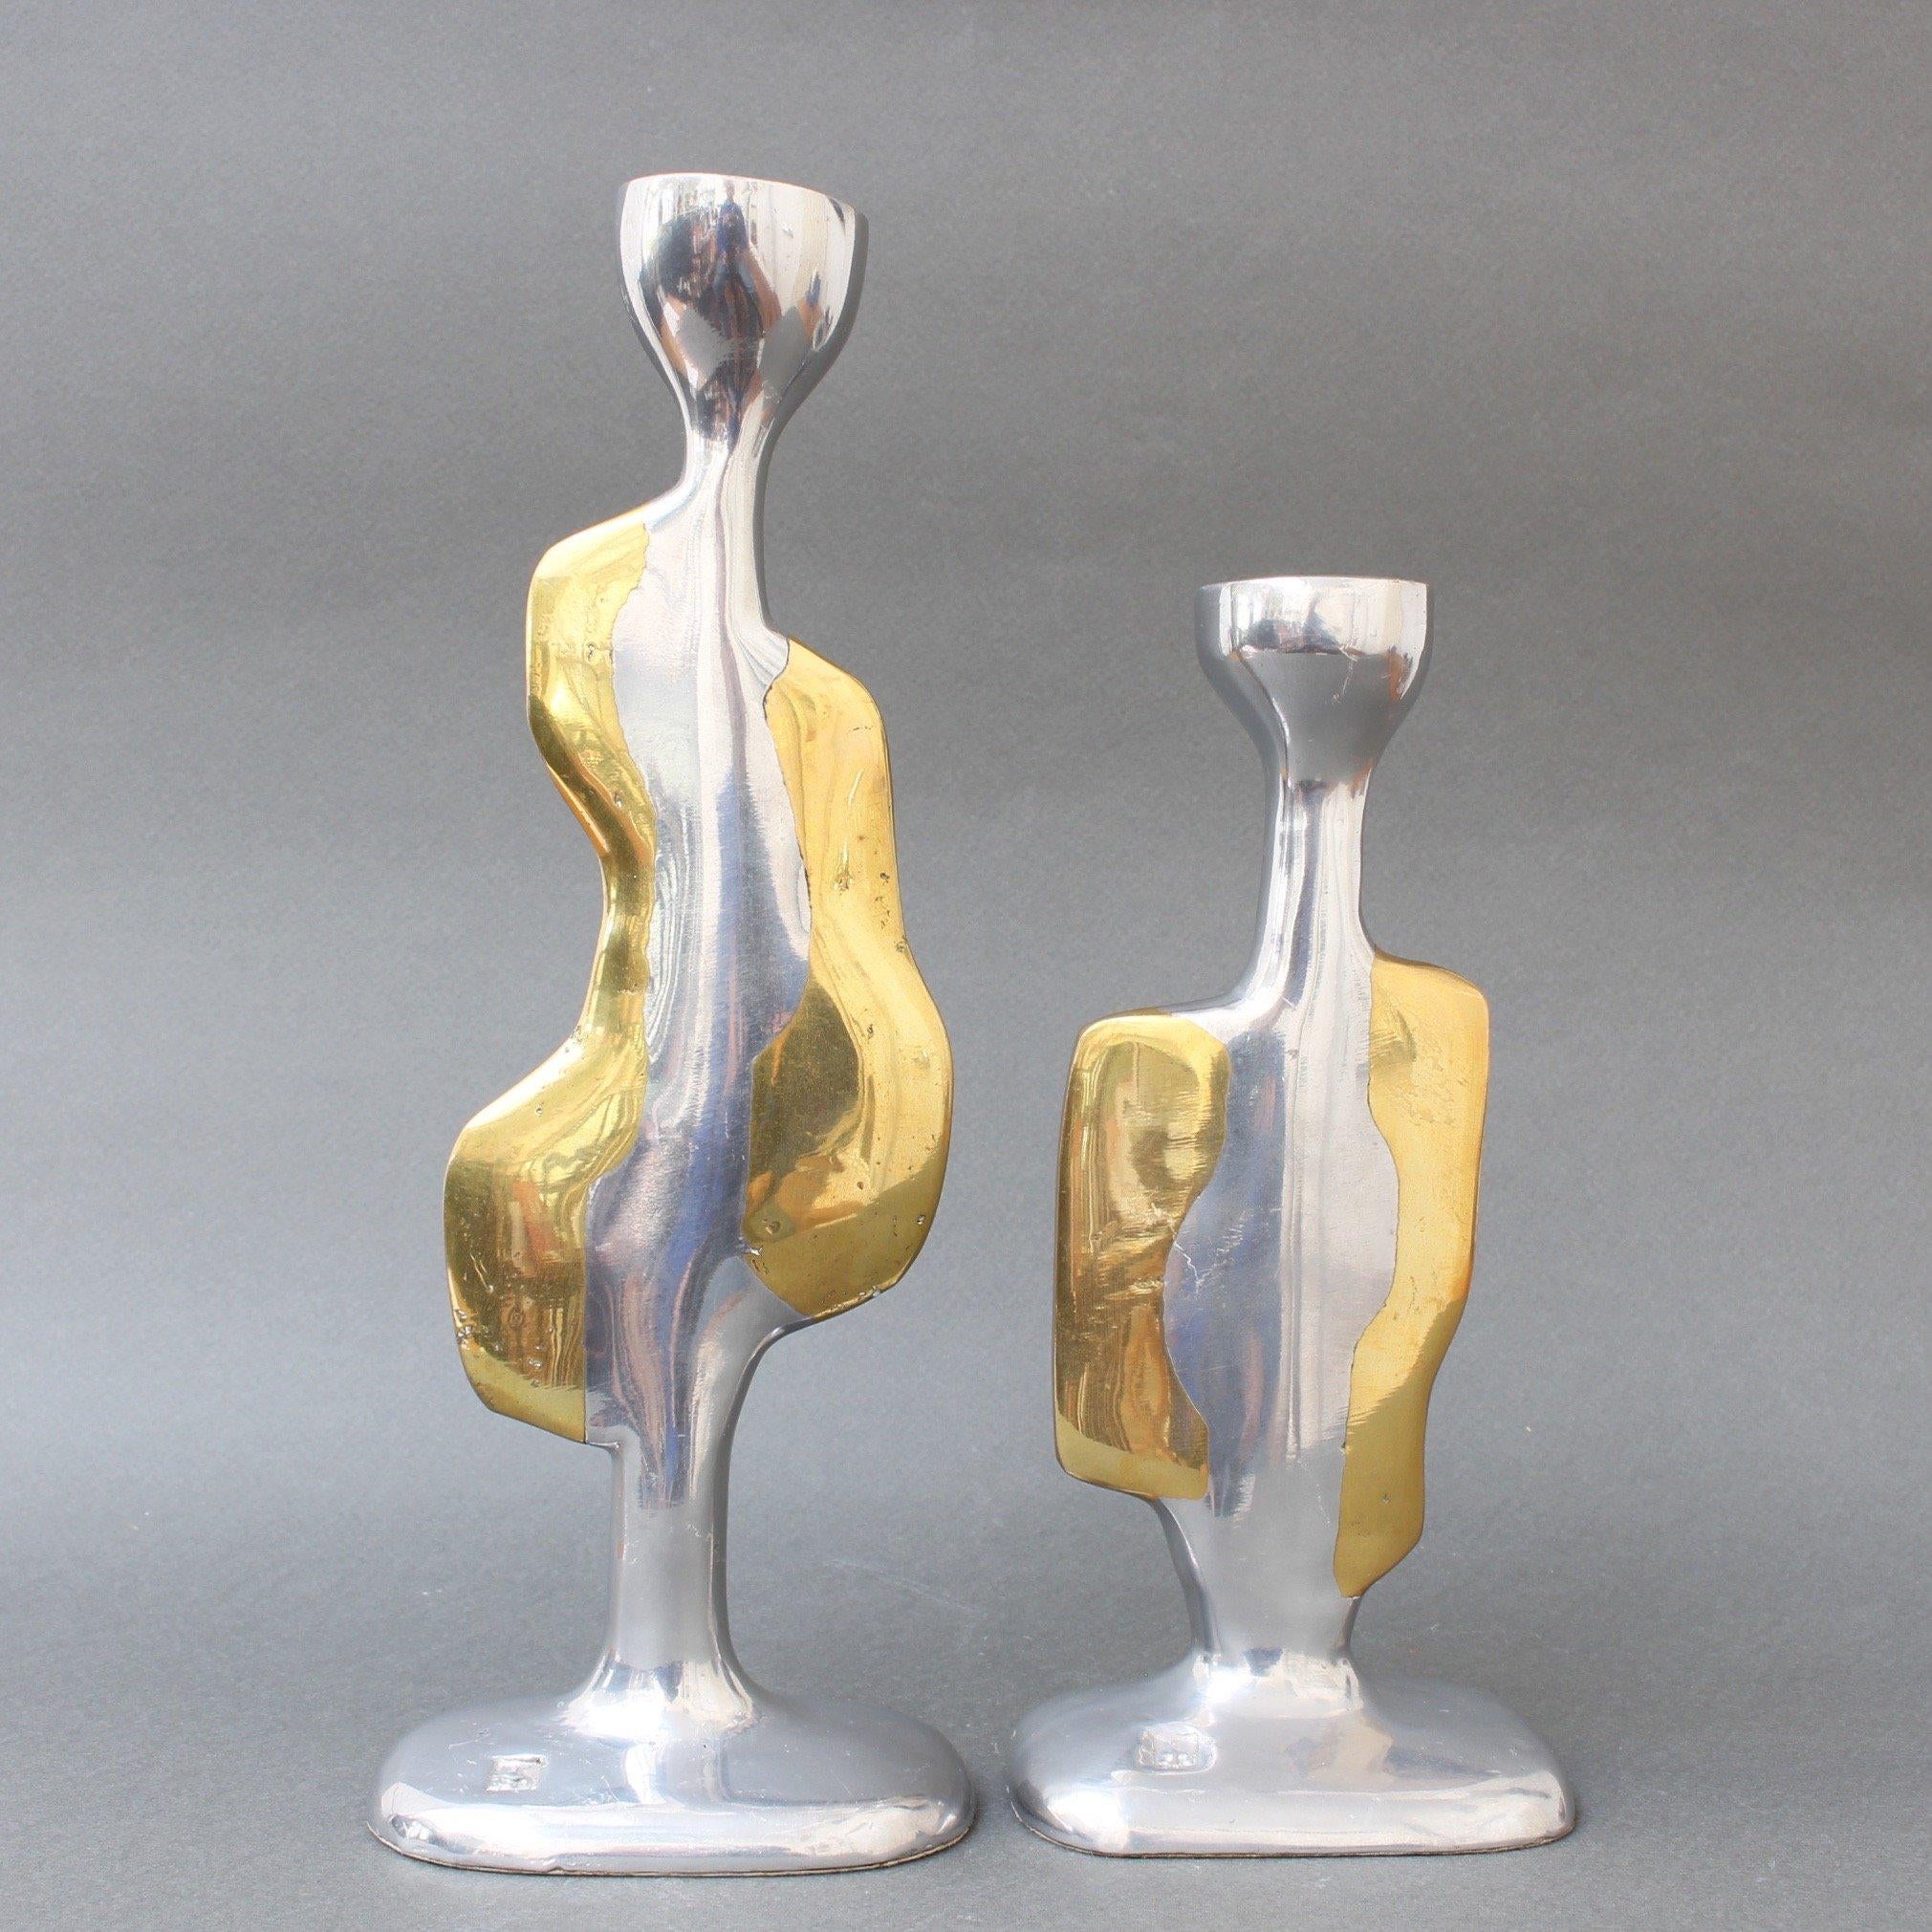 Pair of brutalist aluminium and brass candlesticks by David Marshall (circa 1970s). Very unique pair of candlesticks which are both weighty and tactile, curvy and sensuous. The maker's mark is impressed on the surface of the base. The underside of